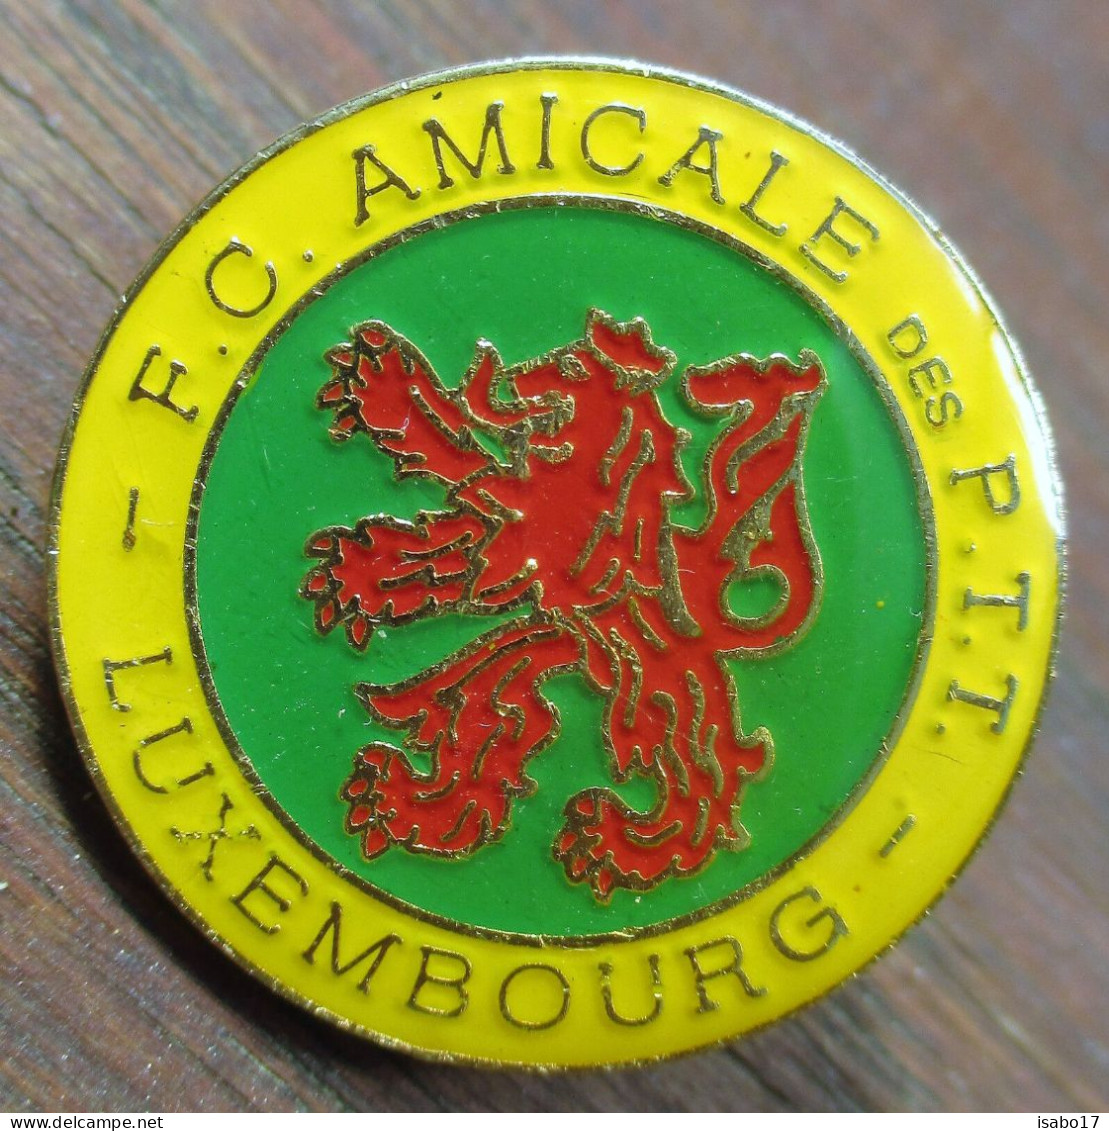 Post " F.C Amicale Des P.T.T.' Luxembourg" Pin - Mail Services